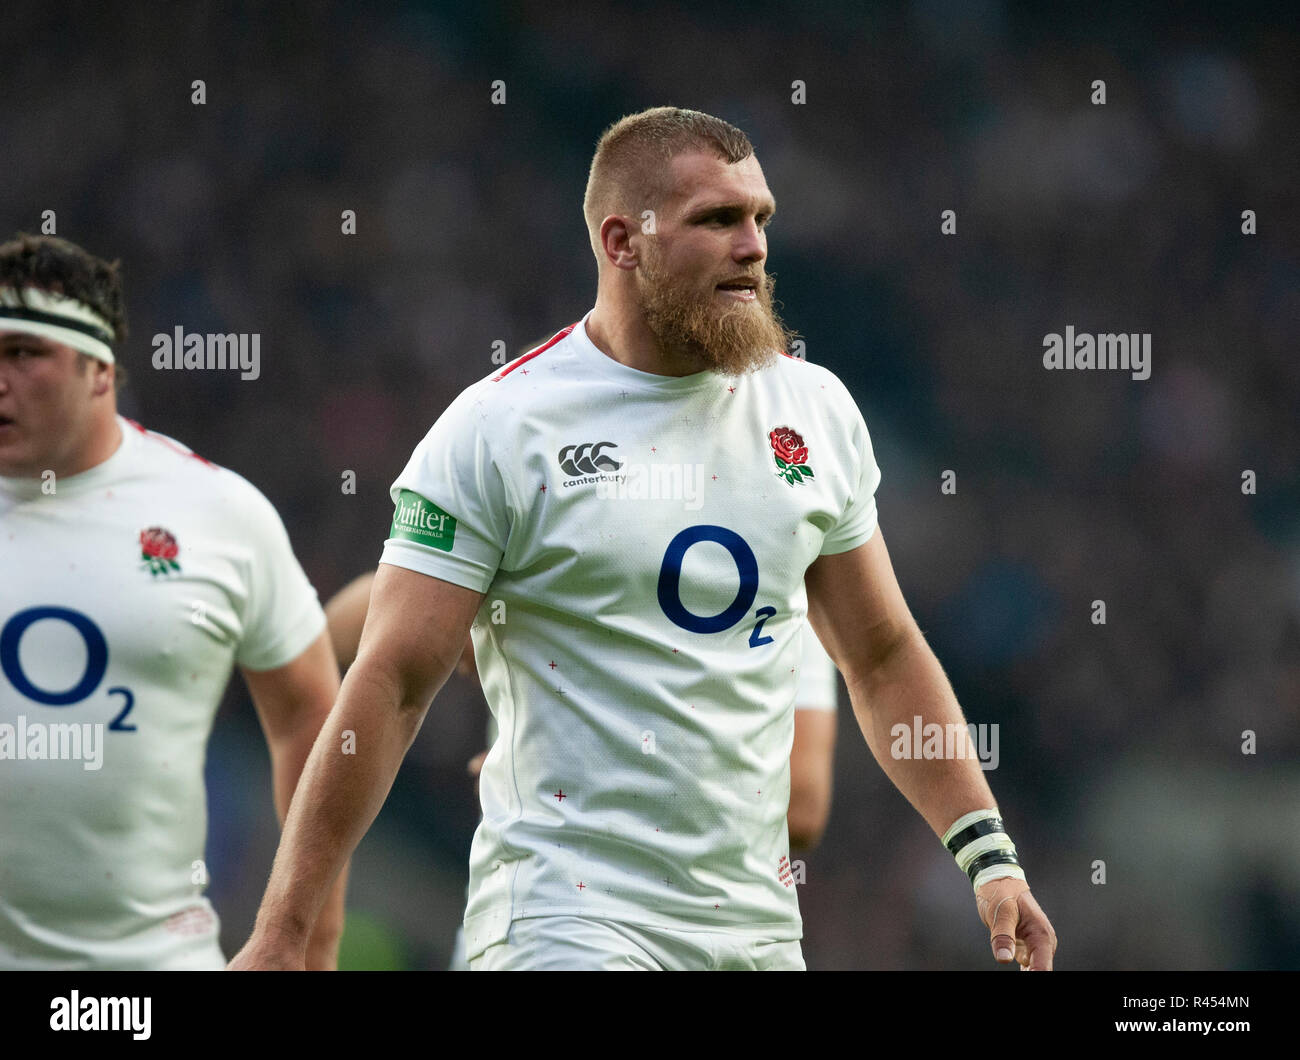 Twickenham, UK. 24th November 2018. Brad Shields of England during the Quilter International Rugby match between England and Australia. Andrew Taylor/Alamy Live News Stock Photo